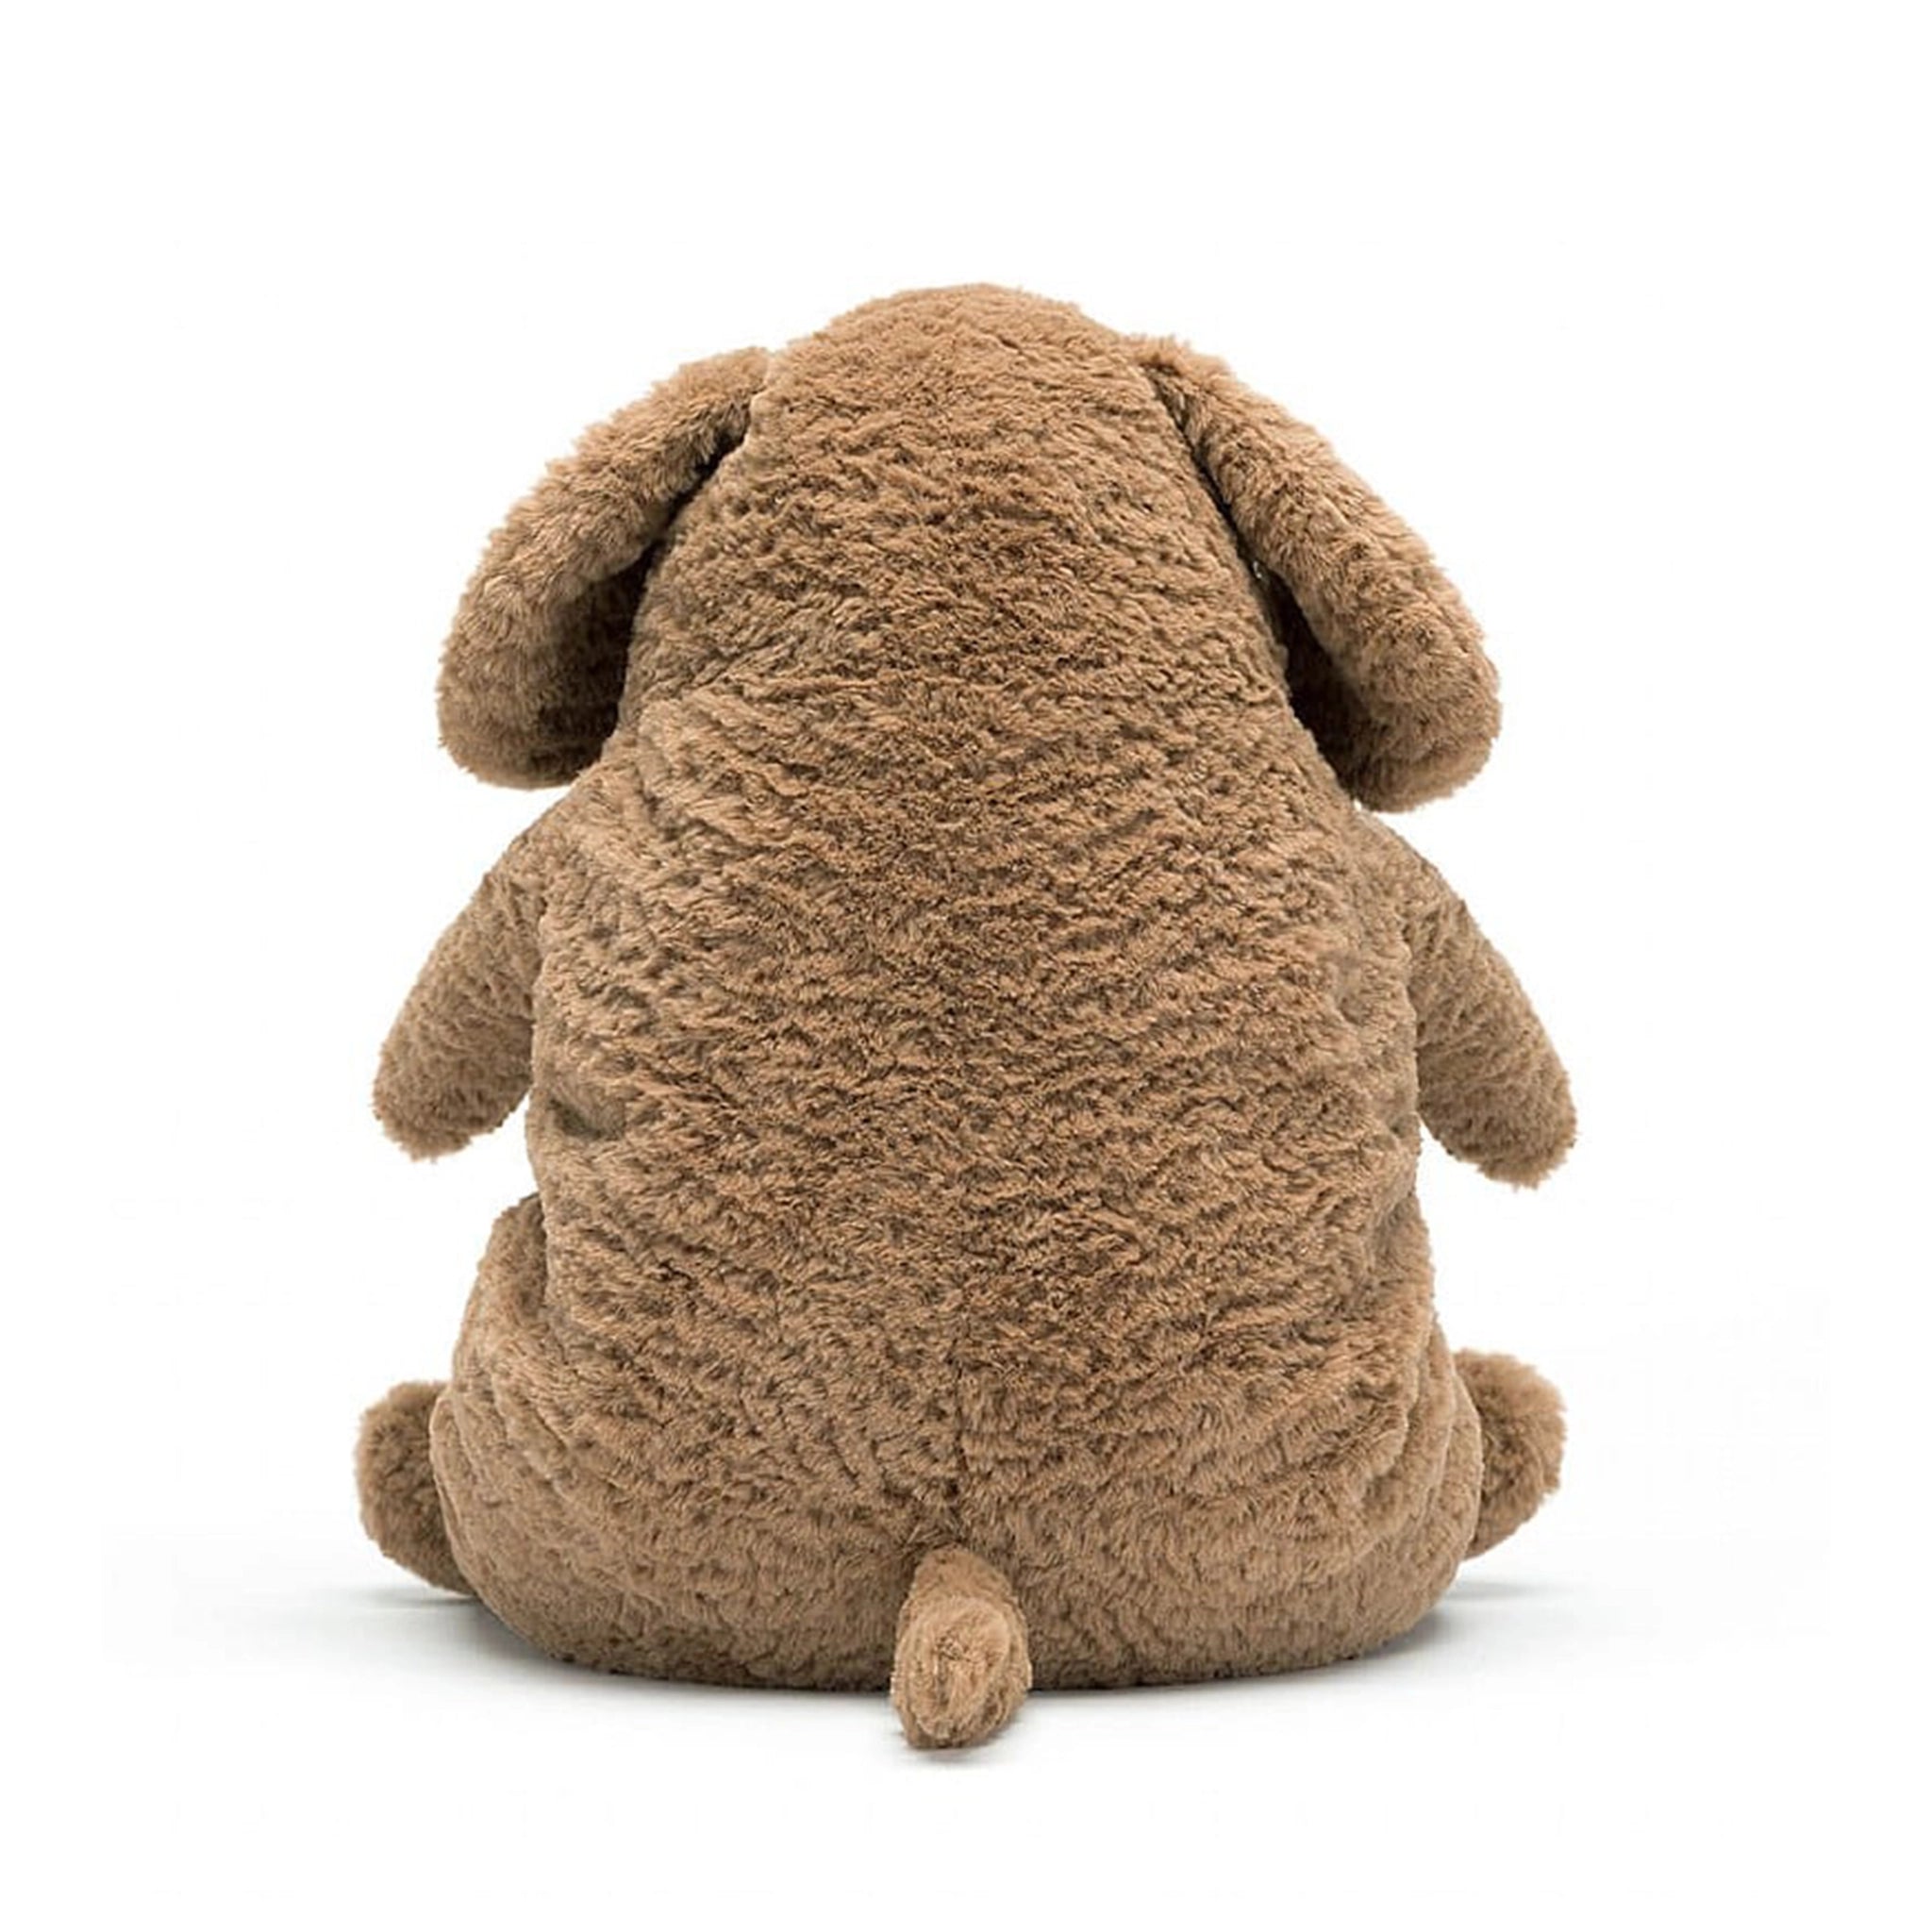 On a white background is a snuggly brown stuffed animal dog with sleepy eyes and a chunky figure.